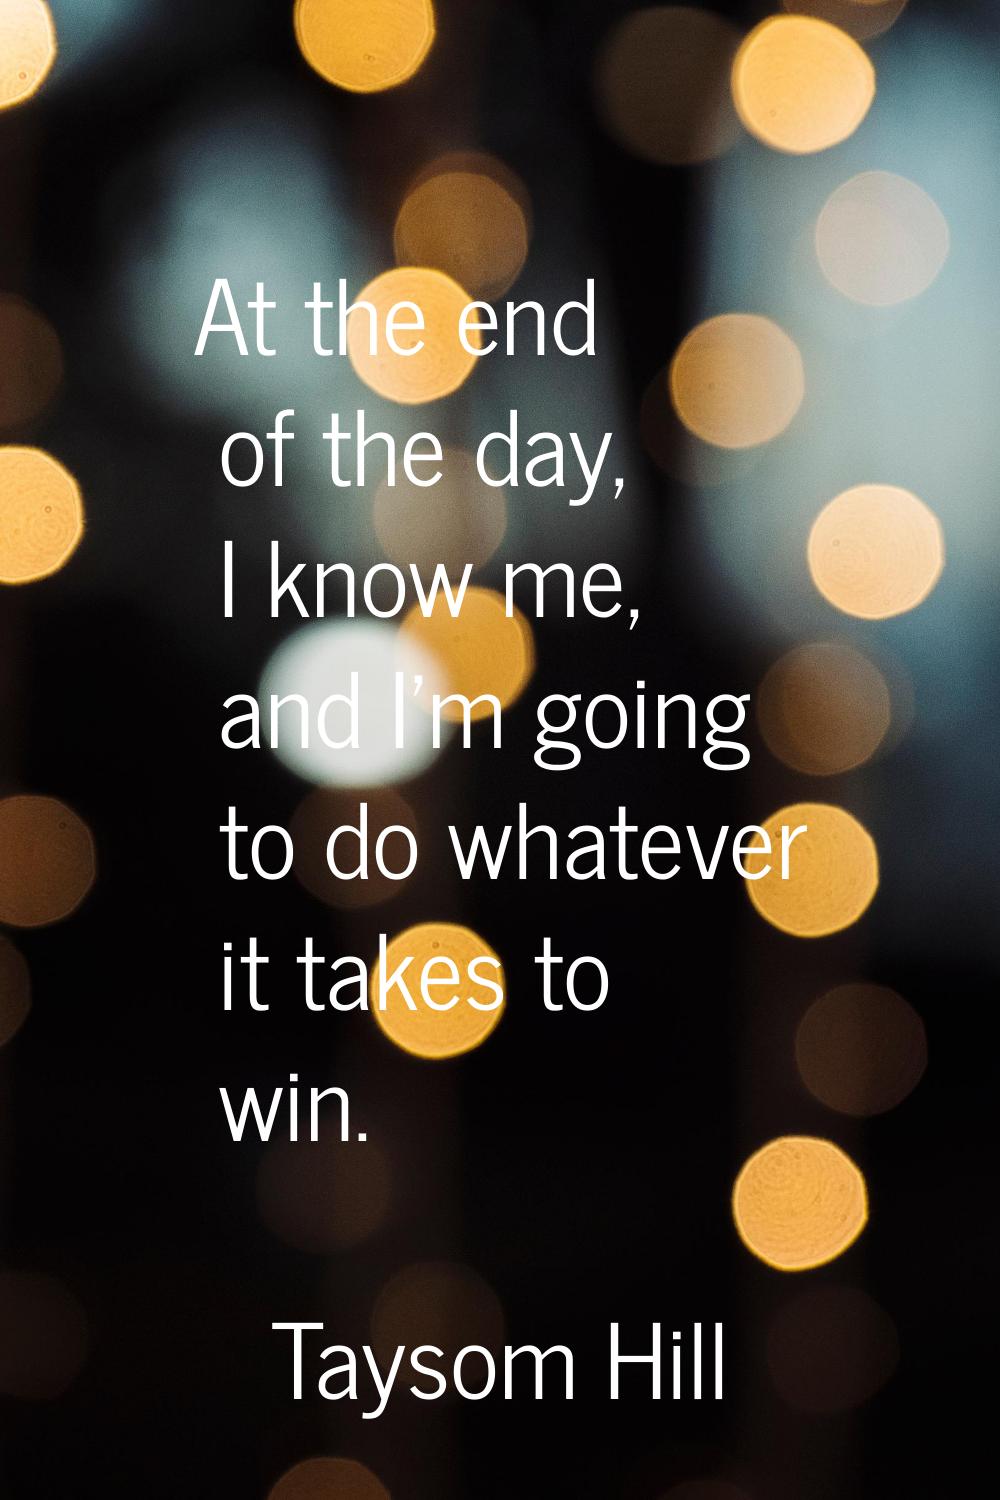 At the end of the day, I know me, and I'm going to do whatever it takes to win.